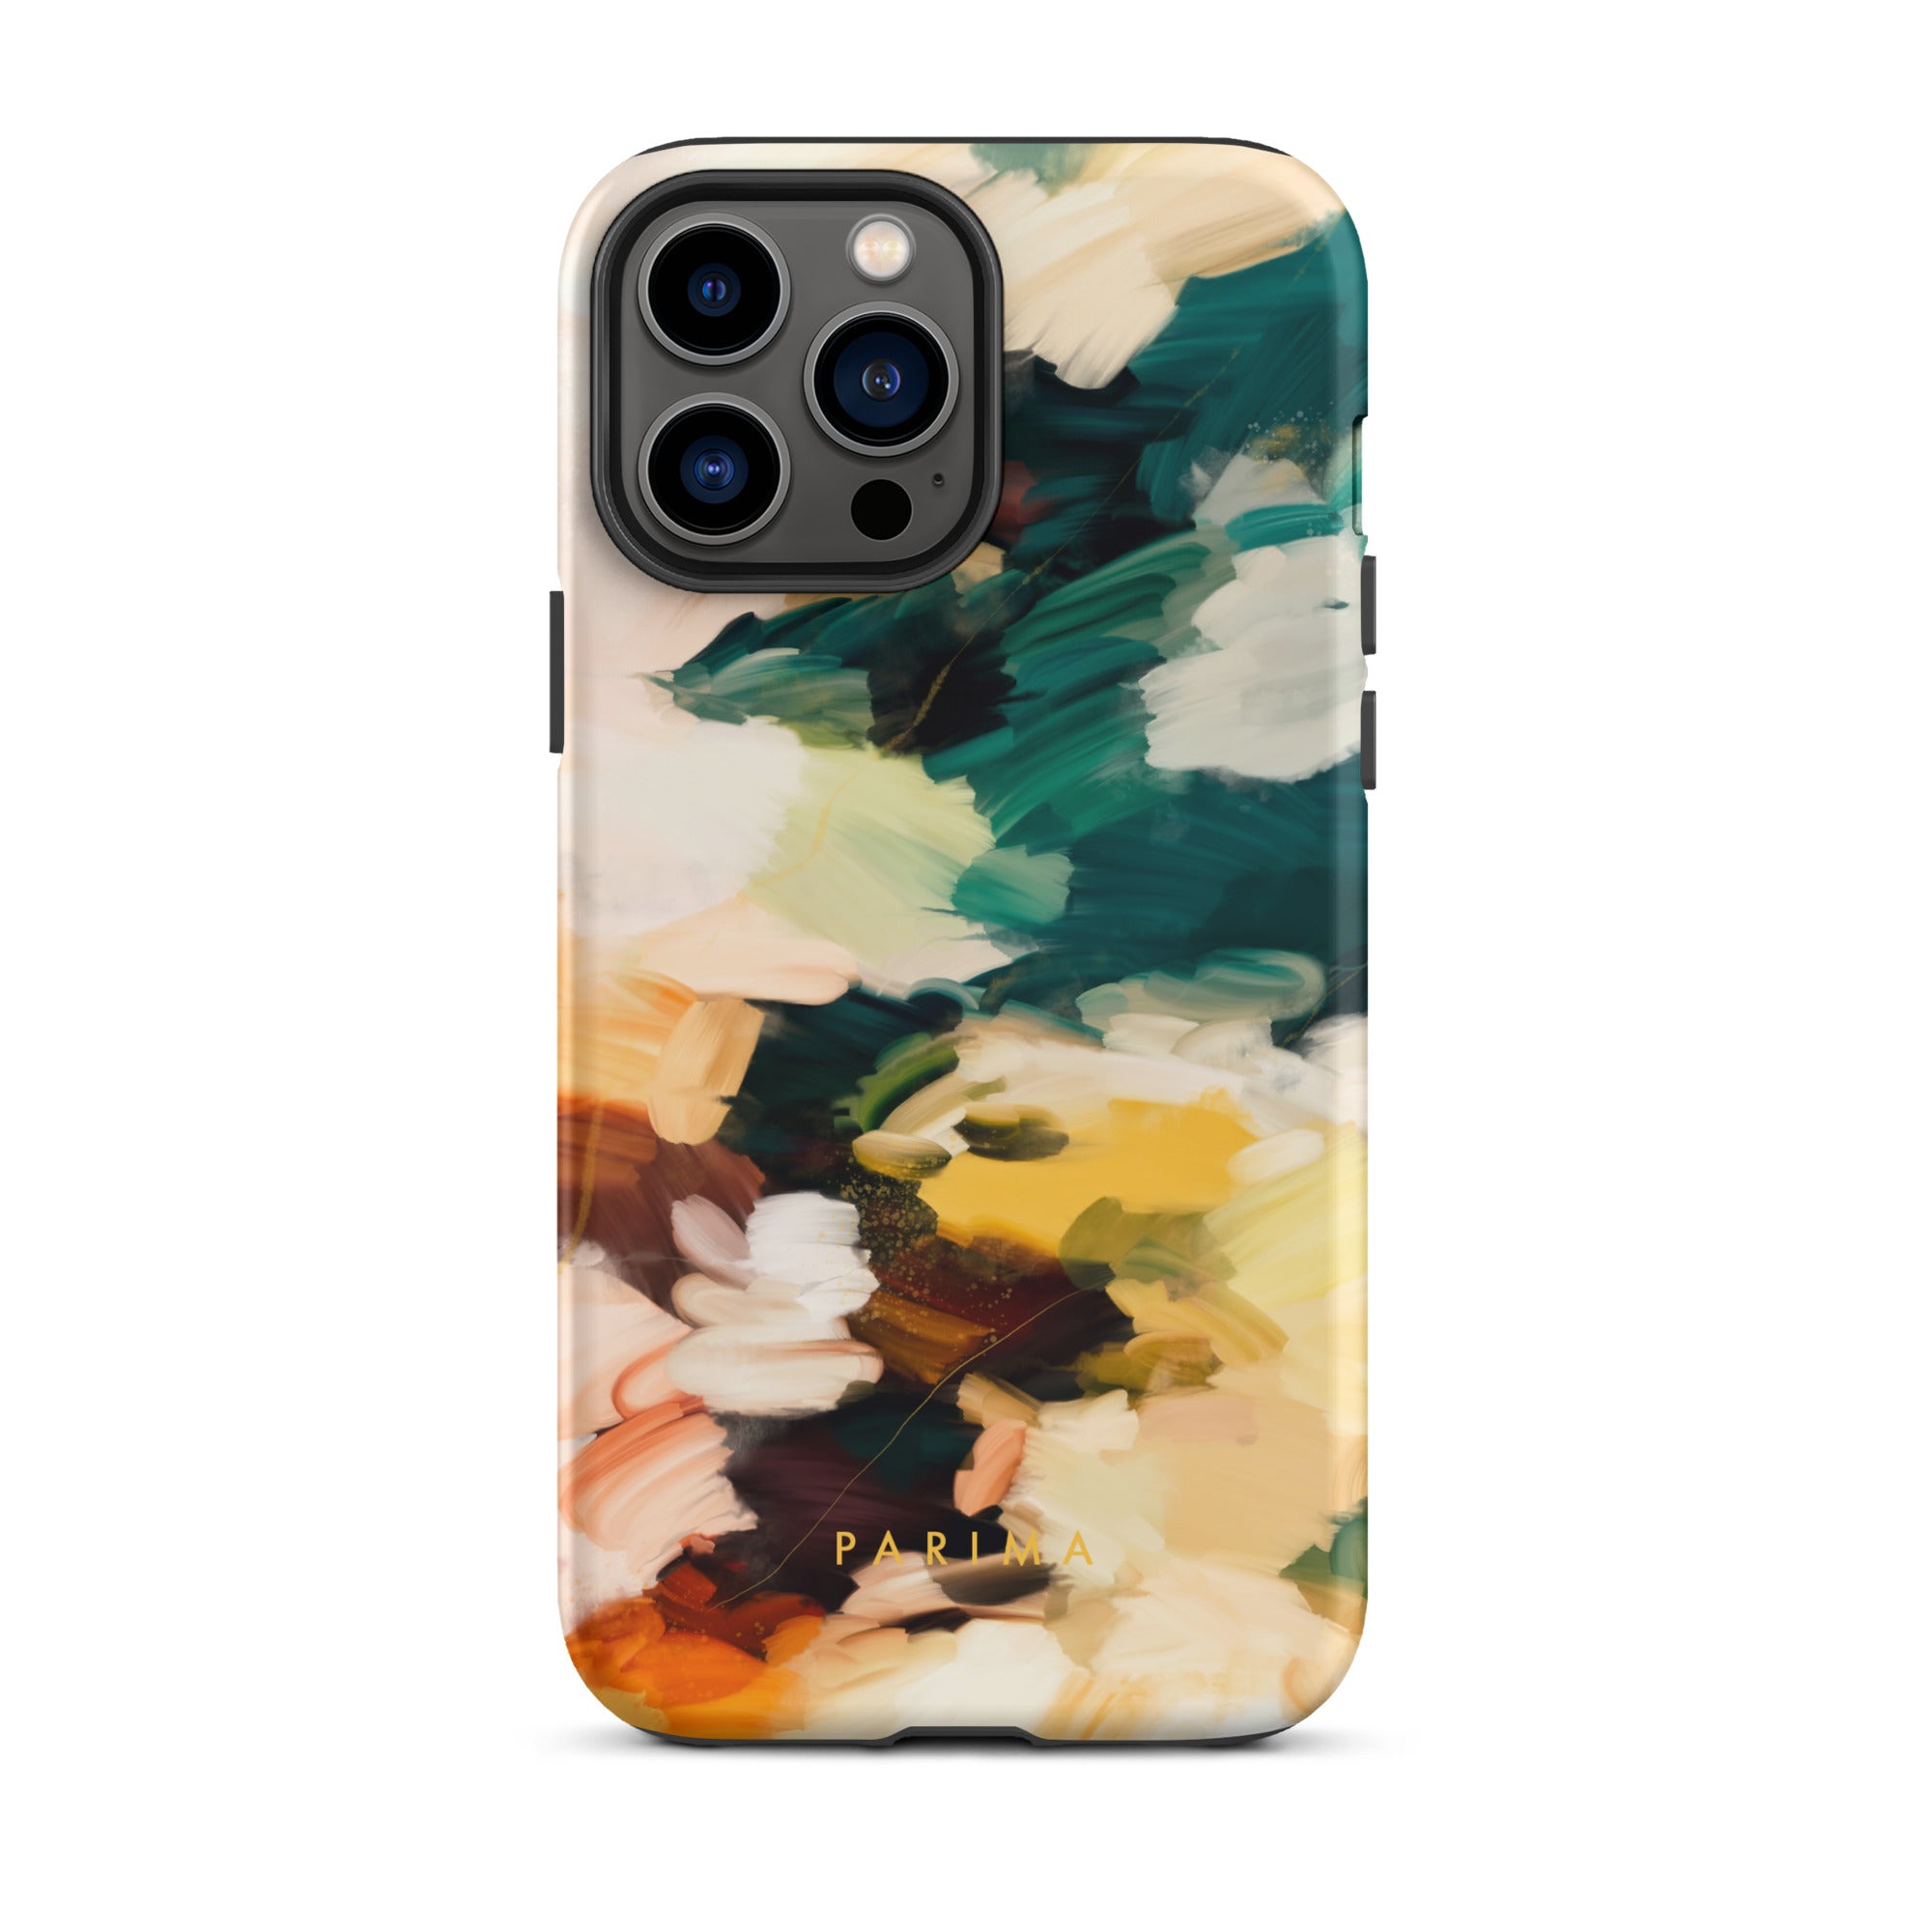 Cinque Terre, green and yellow abstract art - iPhone 13 Pro Max tough case by Parima Studio